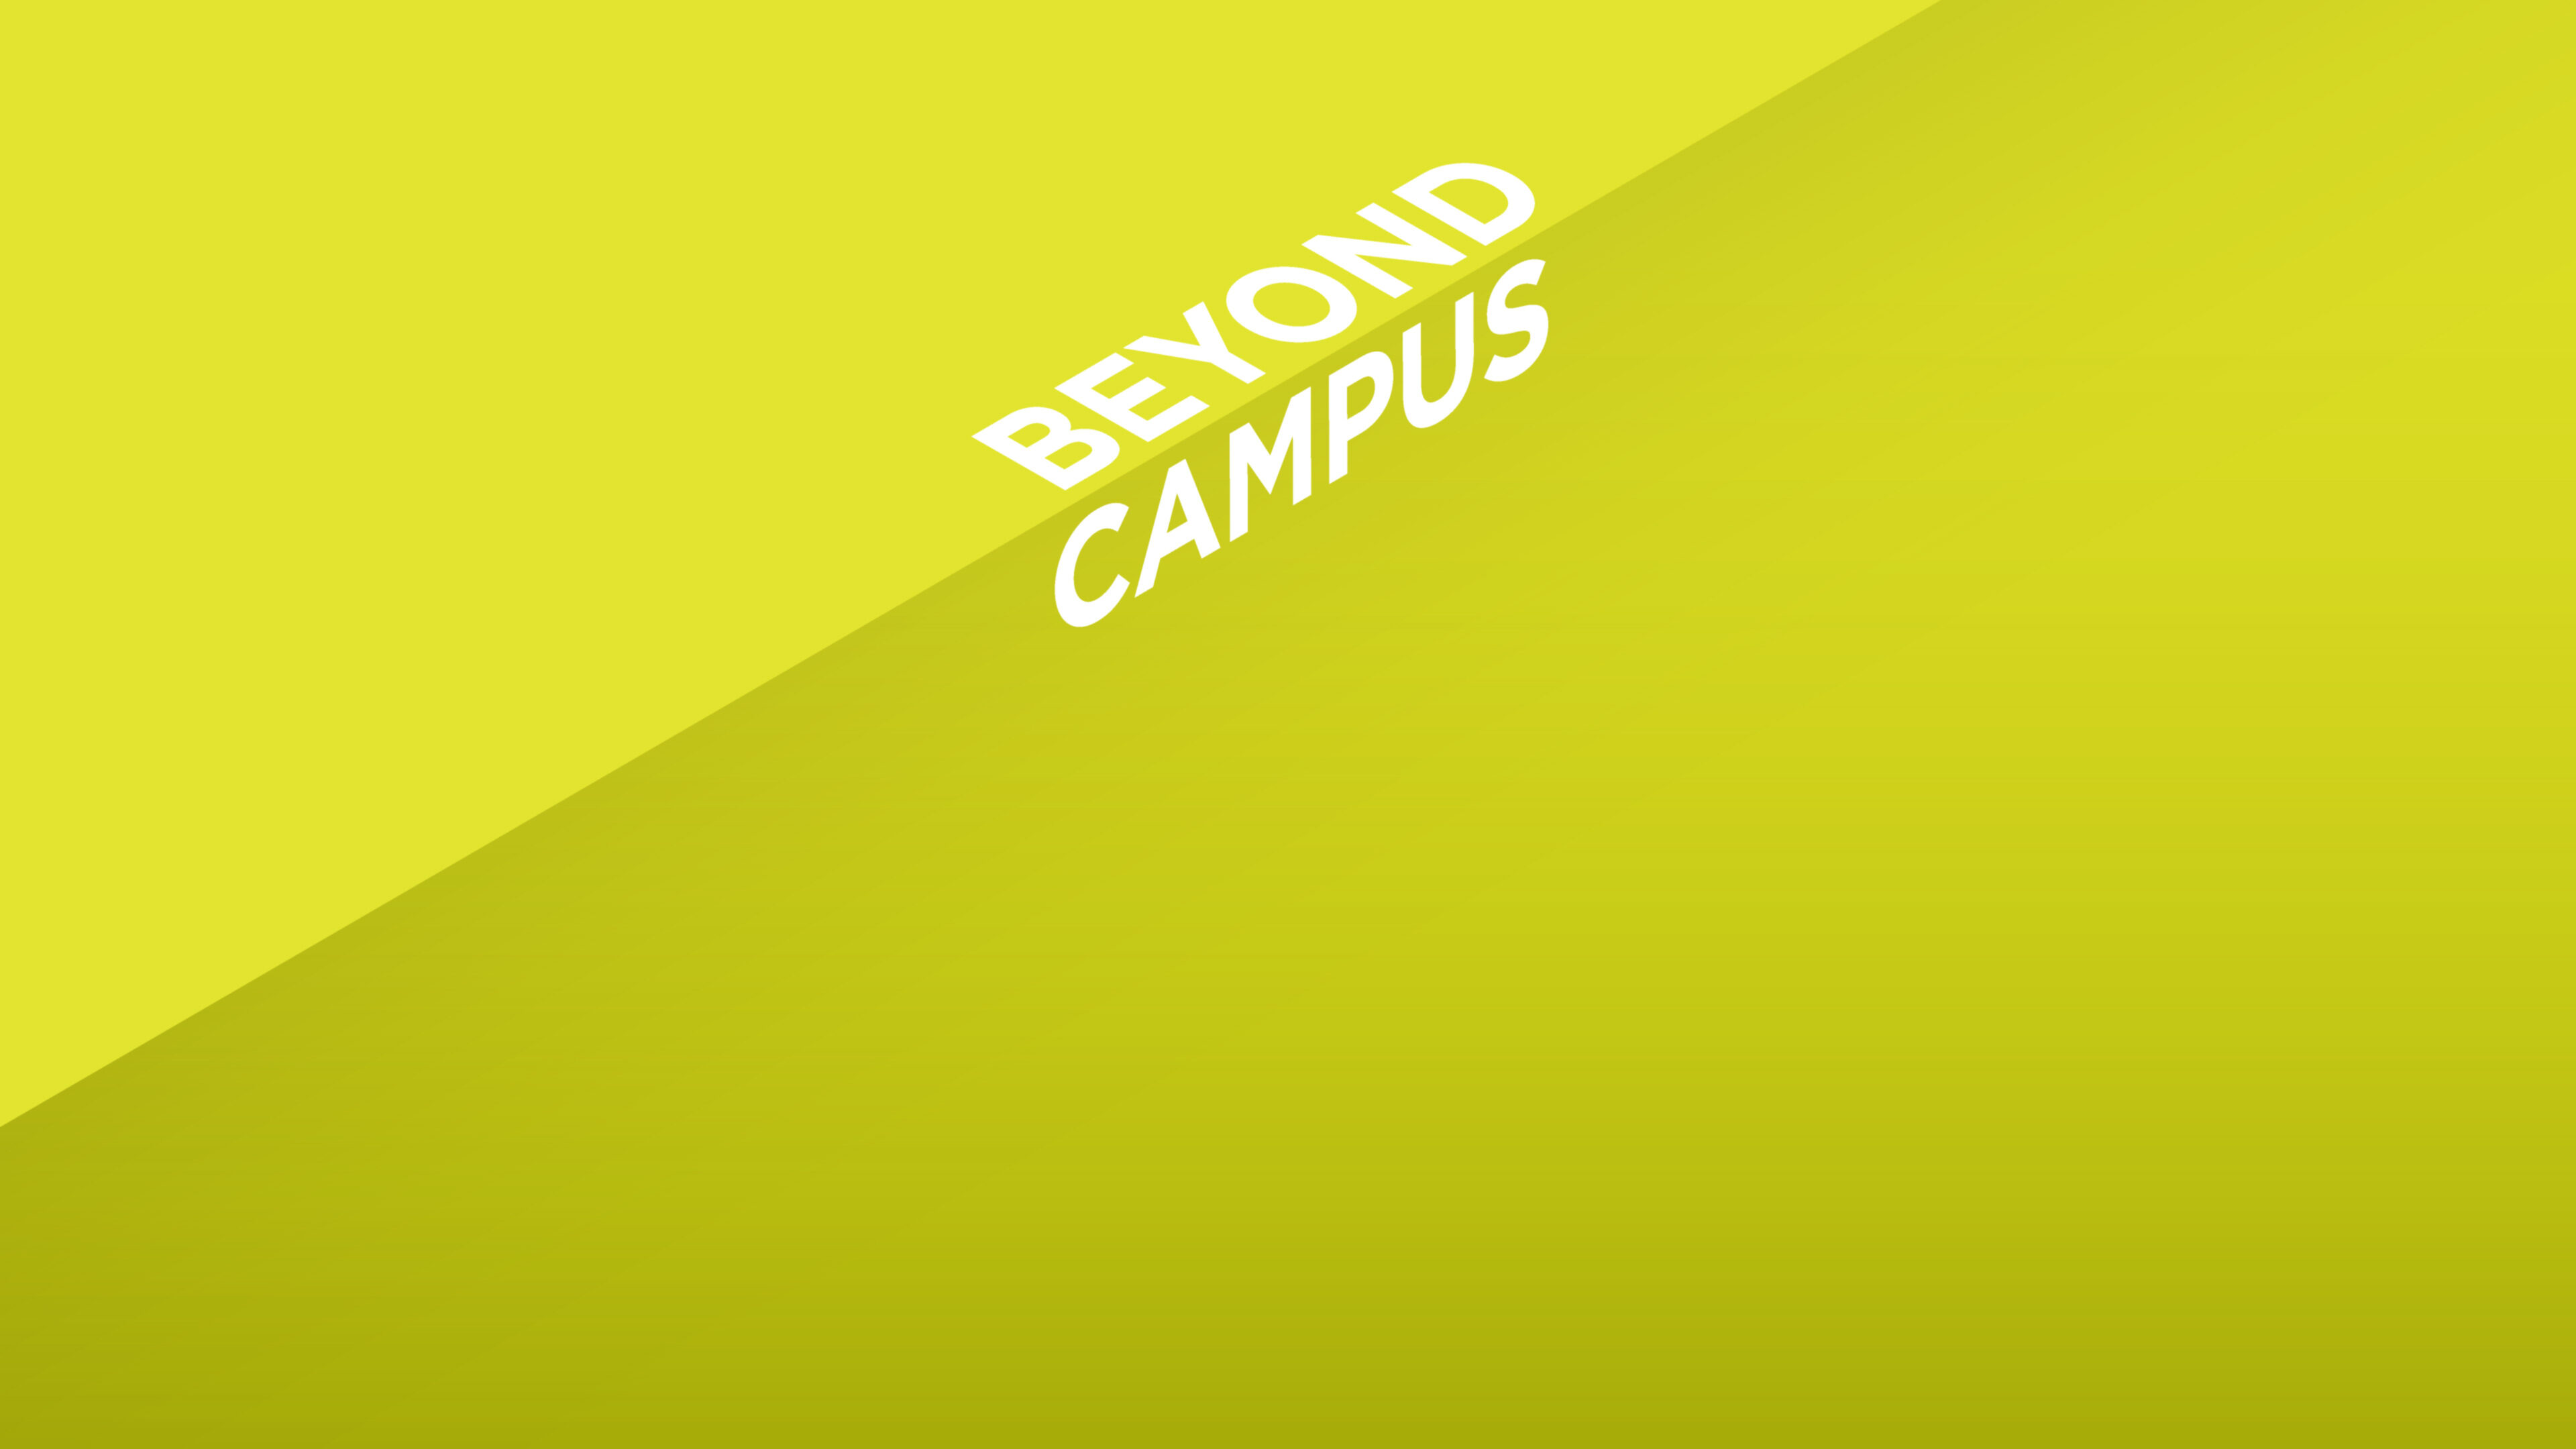 "Beyond Campus" is uppercase, riding along a shadow edge and a full-bleed background.